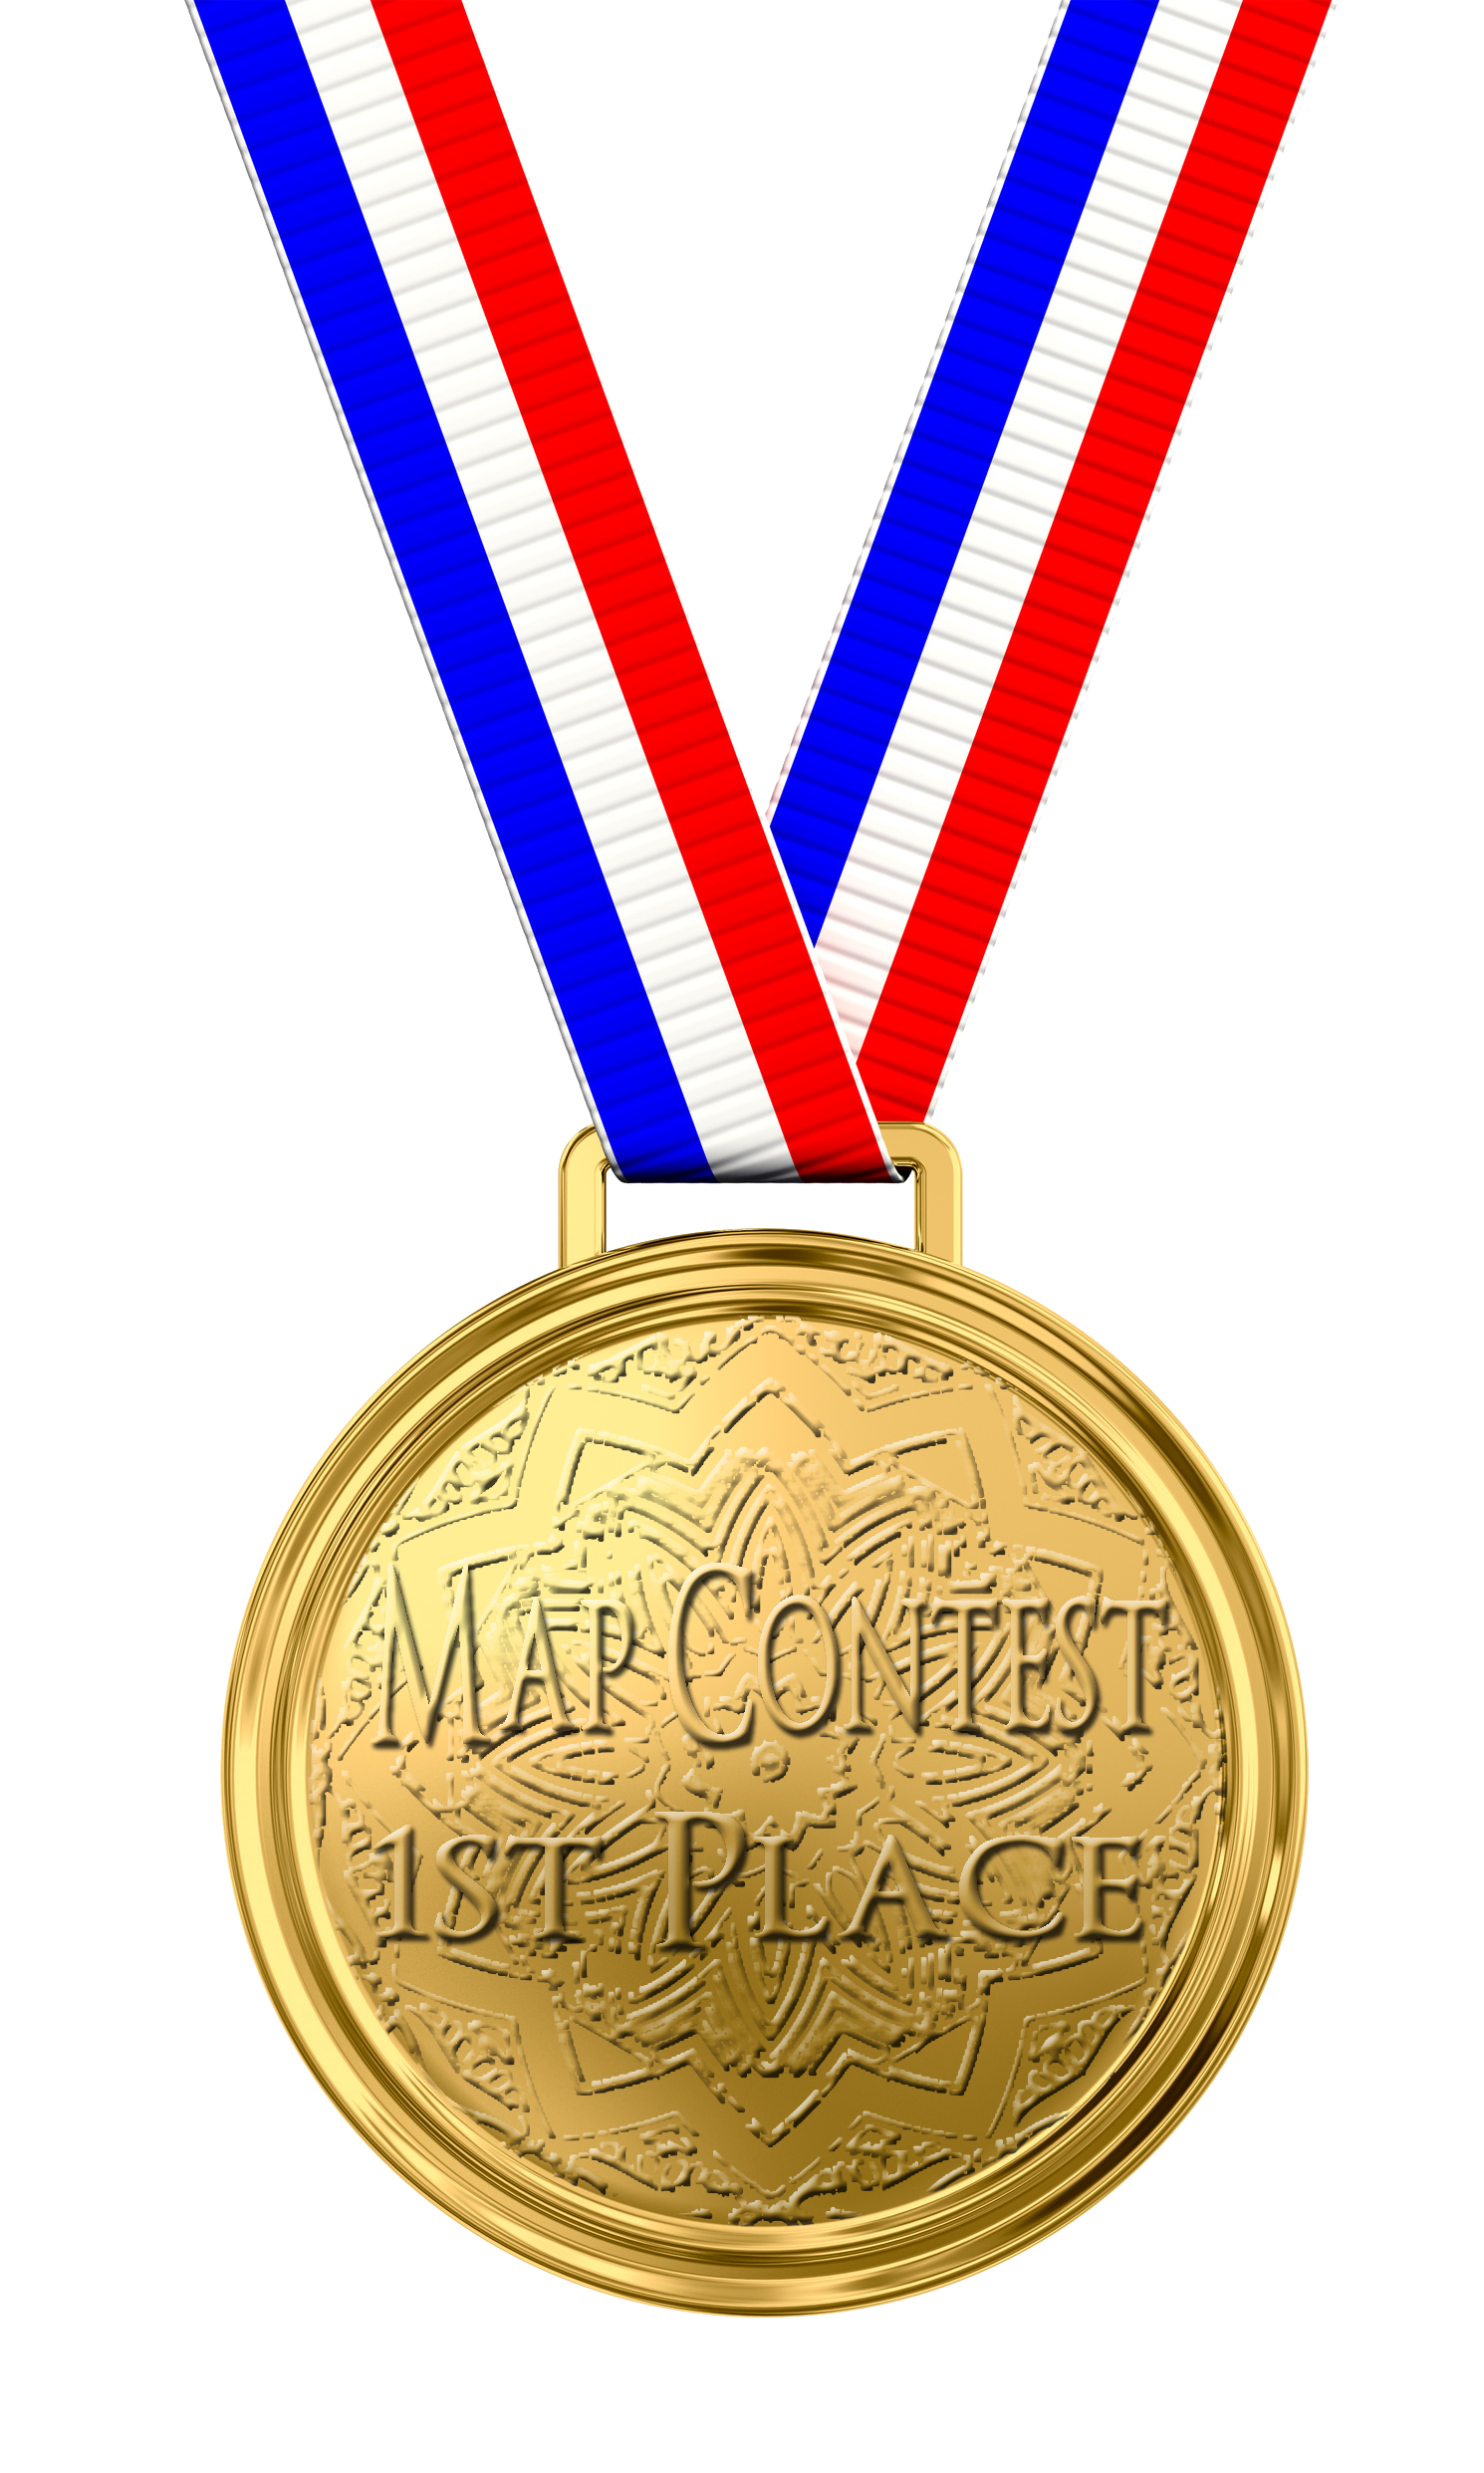 medal clipart gold silver